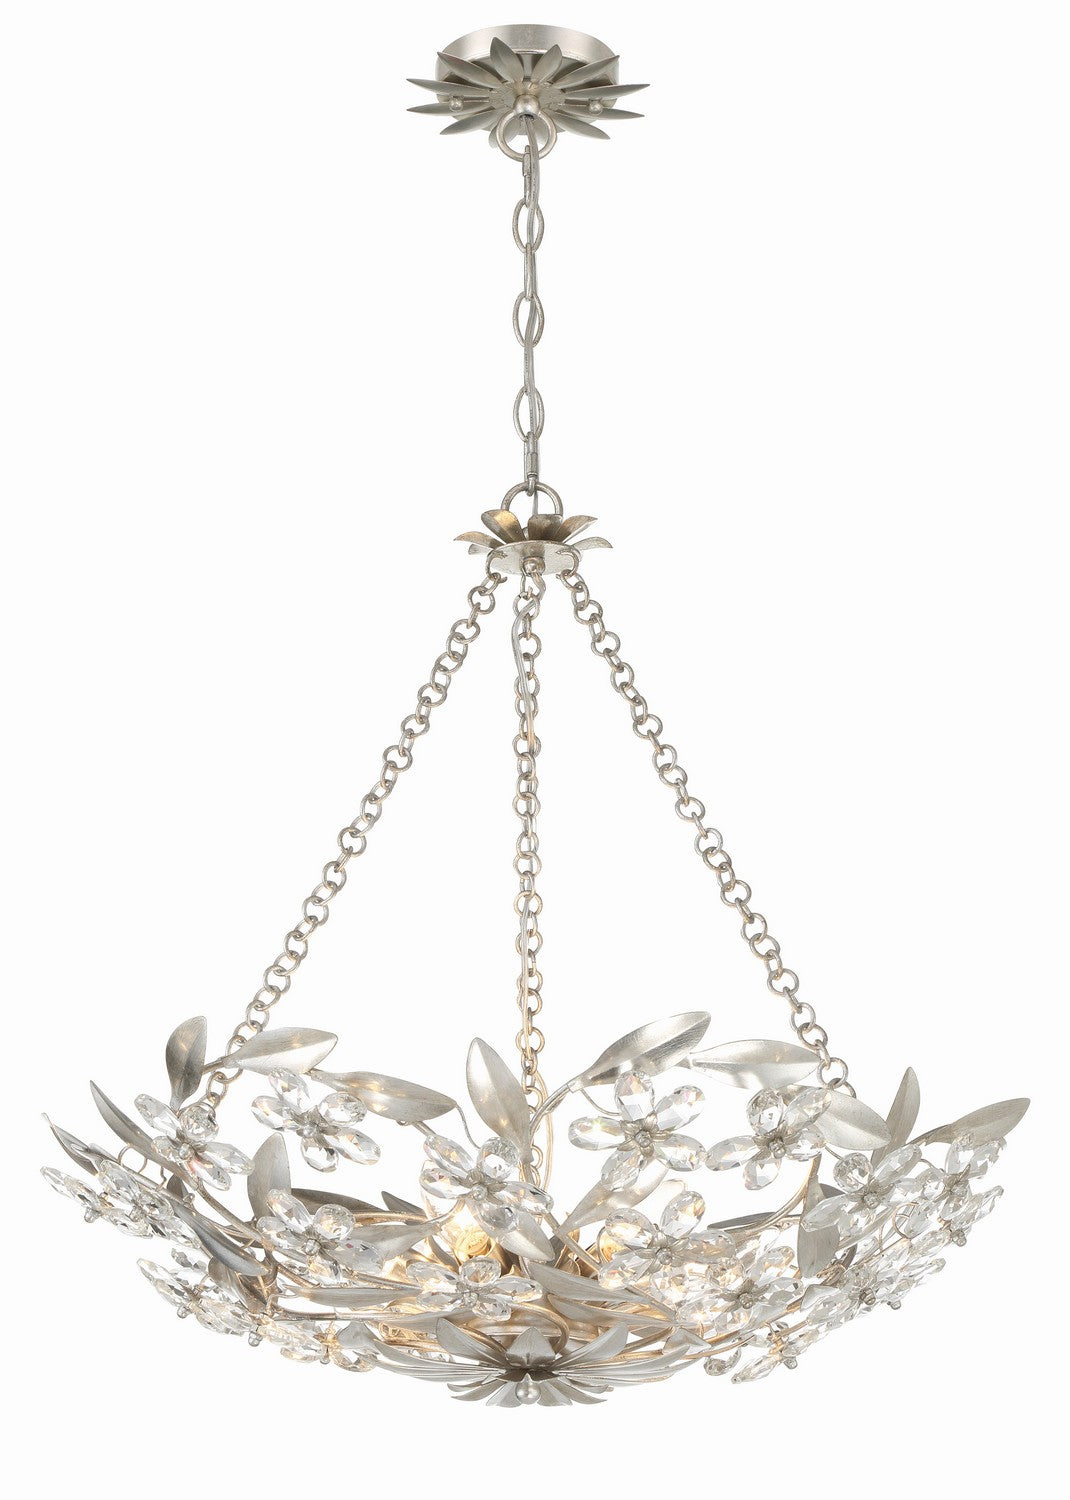 Marselle 6-Light Chandelier in Antique Silver by Crystorama - MPN MSL-306-SA